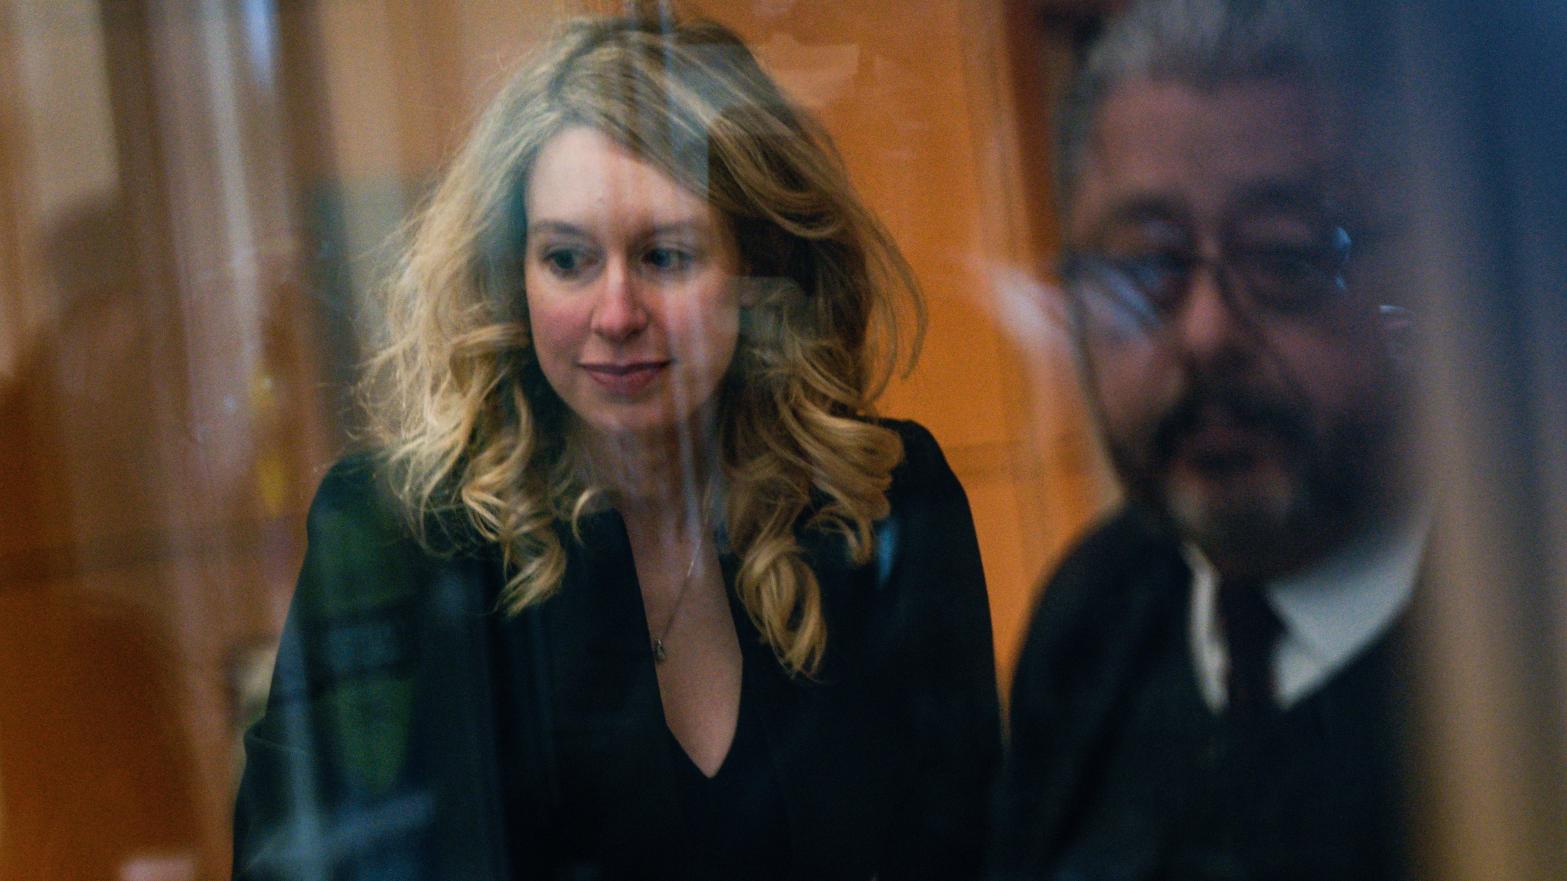 Holmes appears in California court in March 2023 for a restitution hearing. (Image: Philip Pacheco, Getty Images)